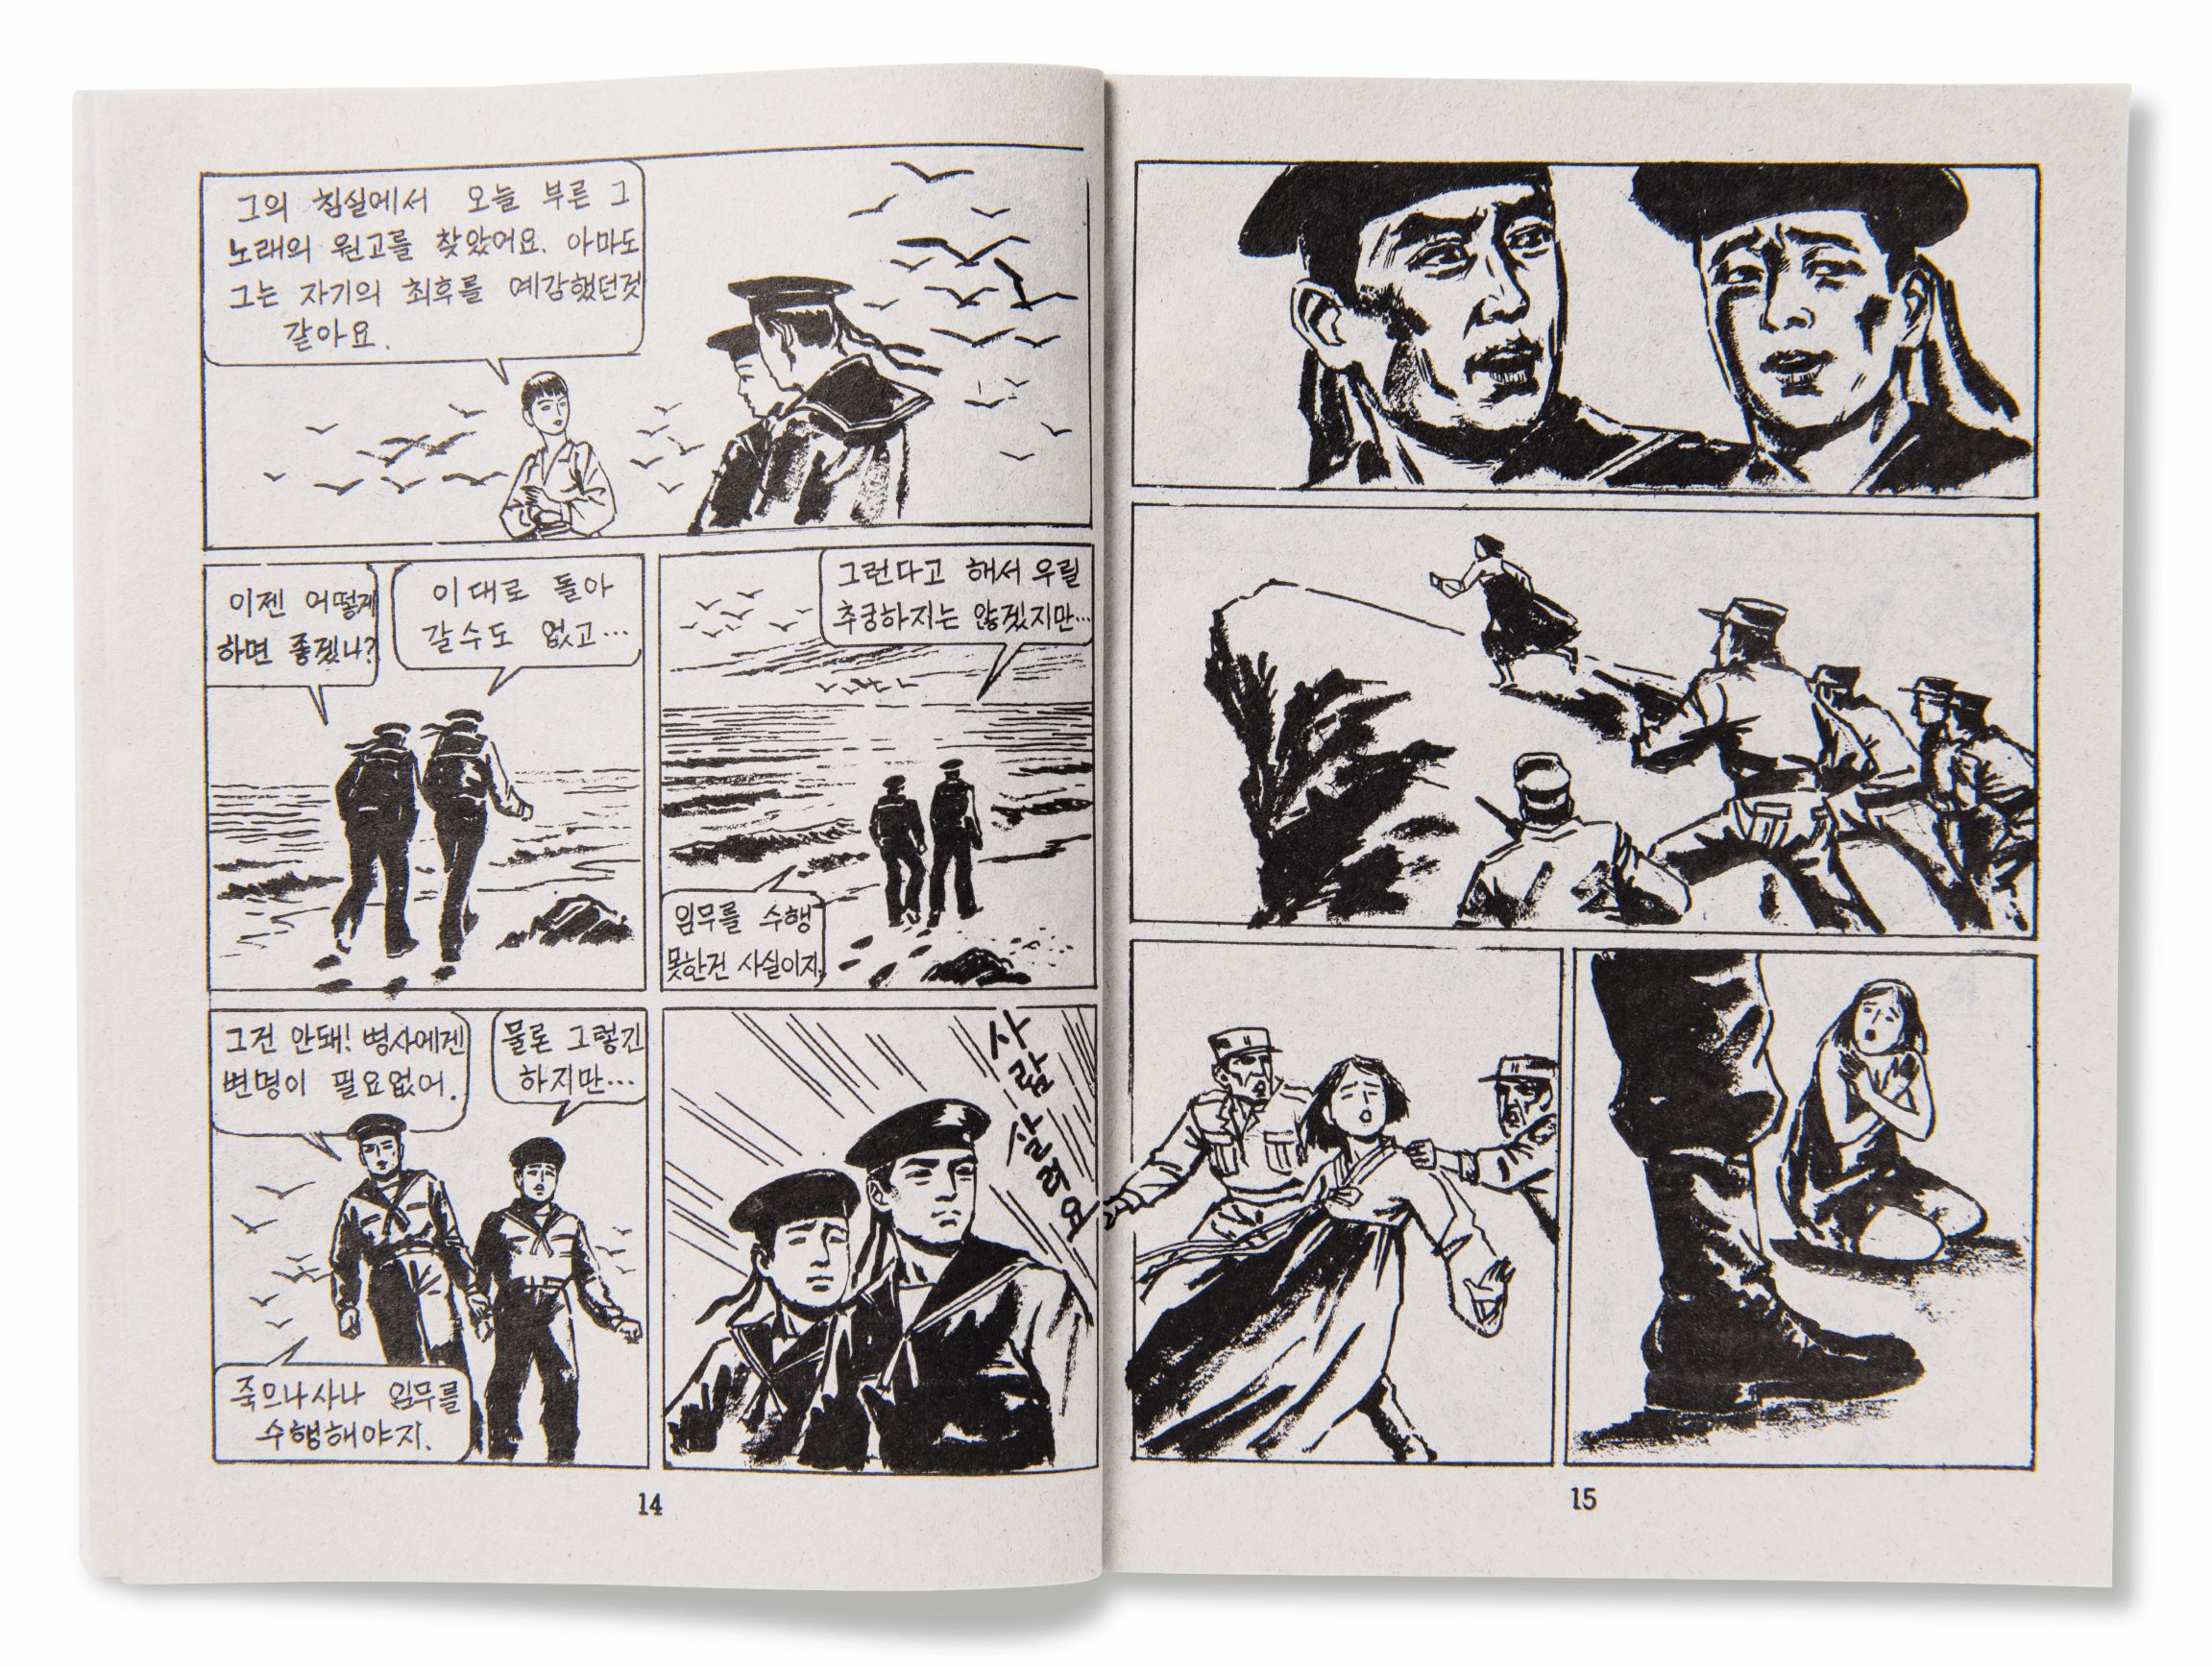 Comic book story ‘Underwater Struggle’, as reproduced in Made in North Korea: Graphics From Everyday Life in the DPRK